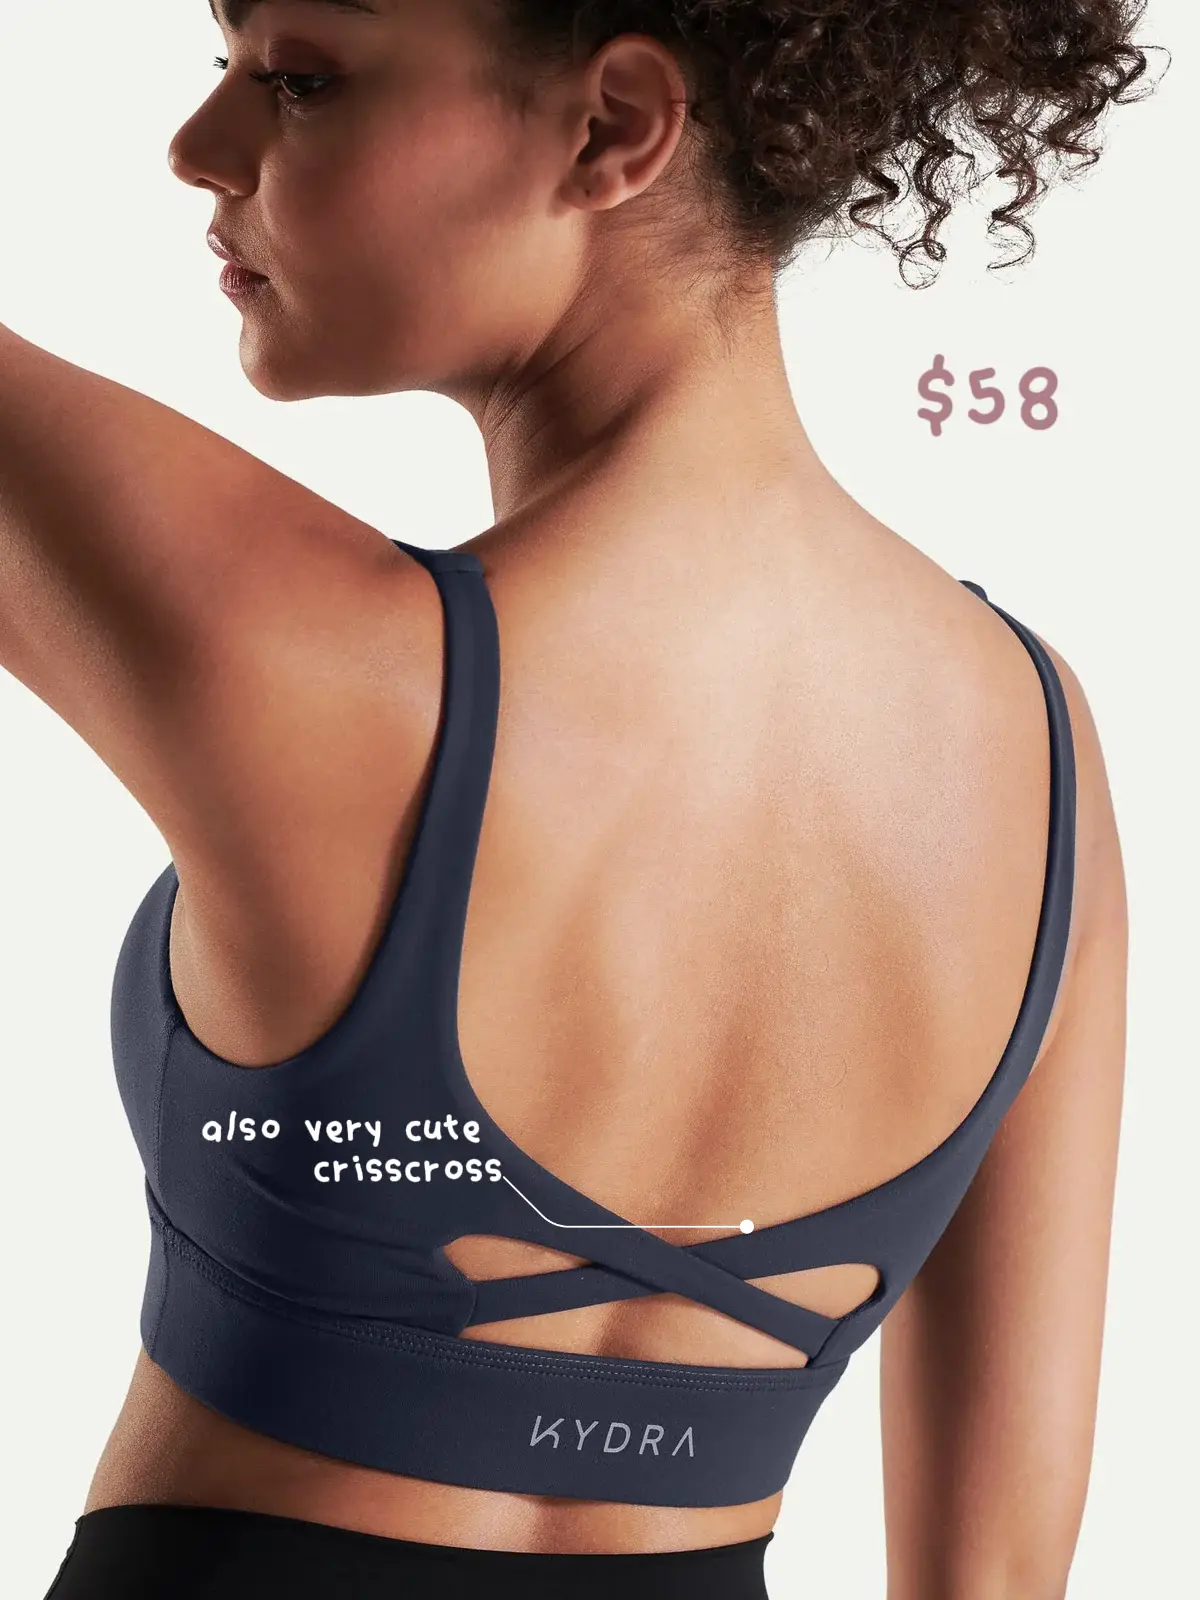 3 ways to style your criss cross back sports bra. Which way would you wear  it? 🖤